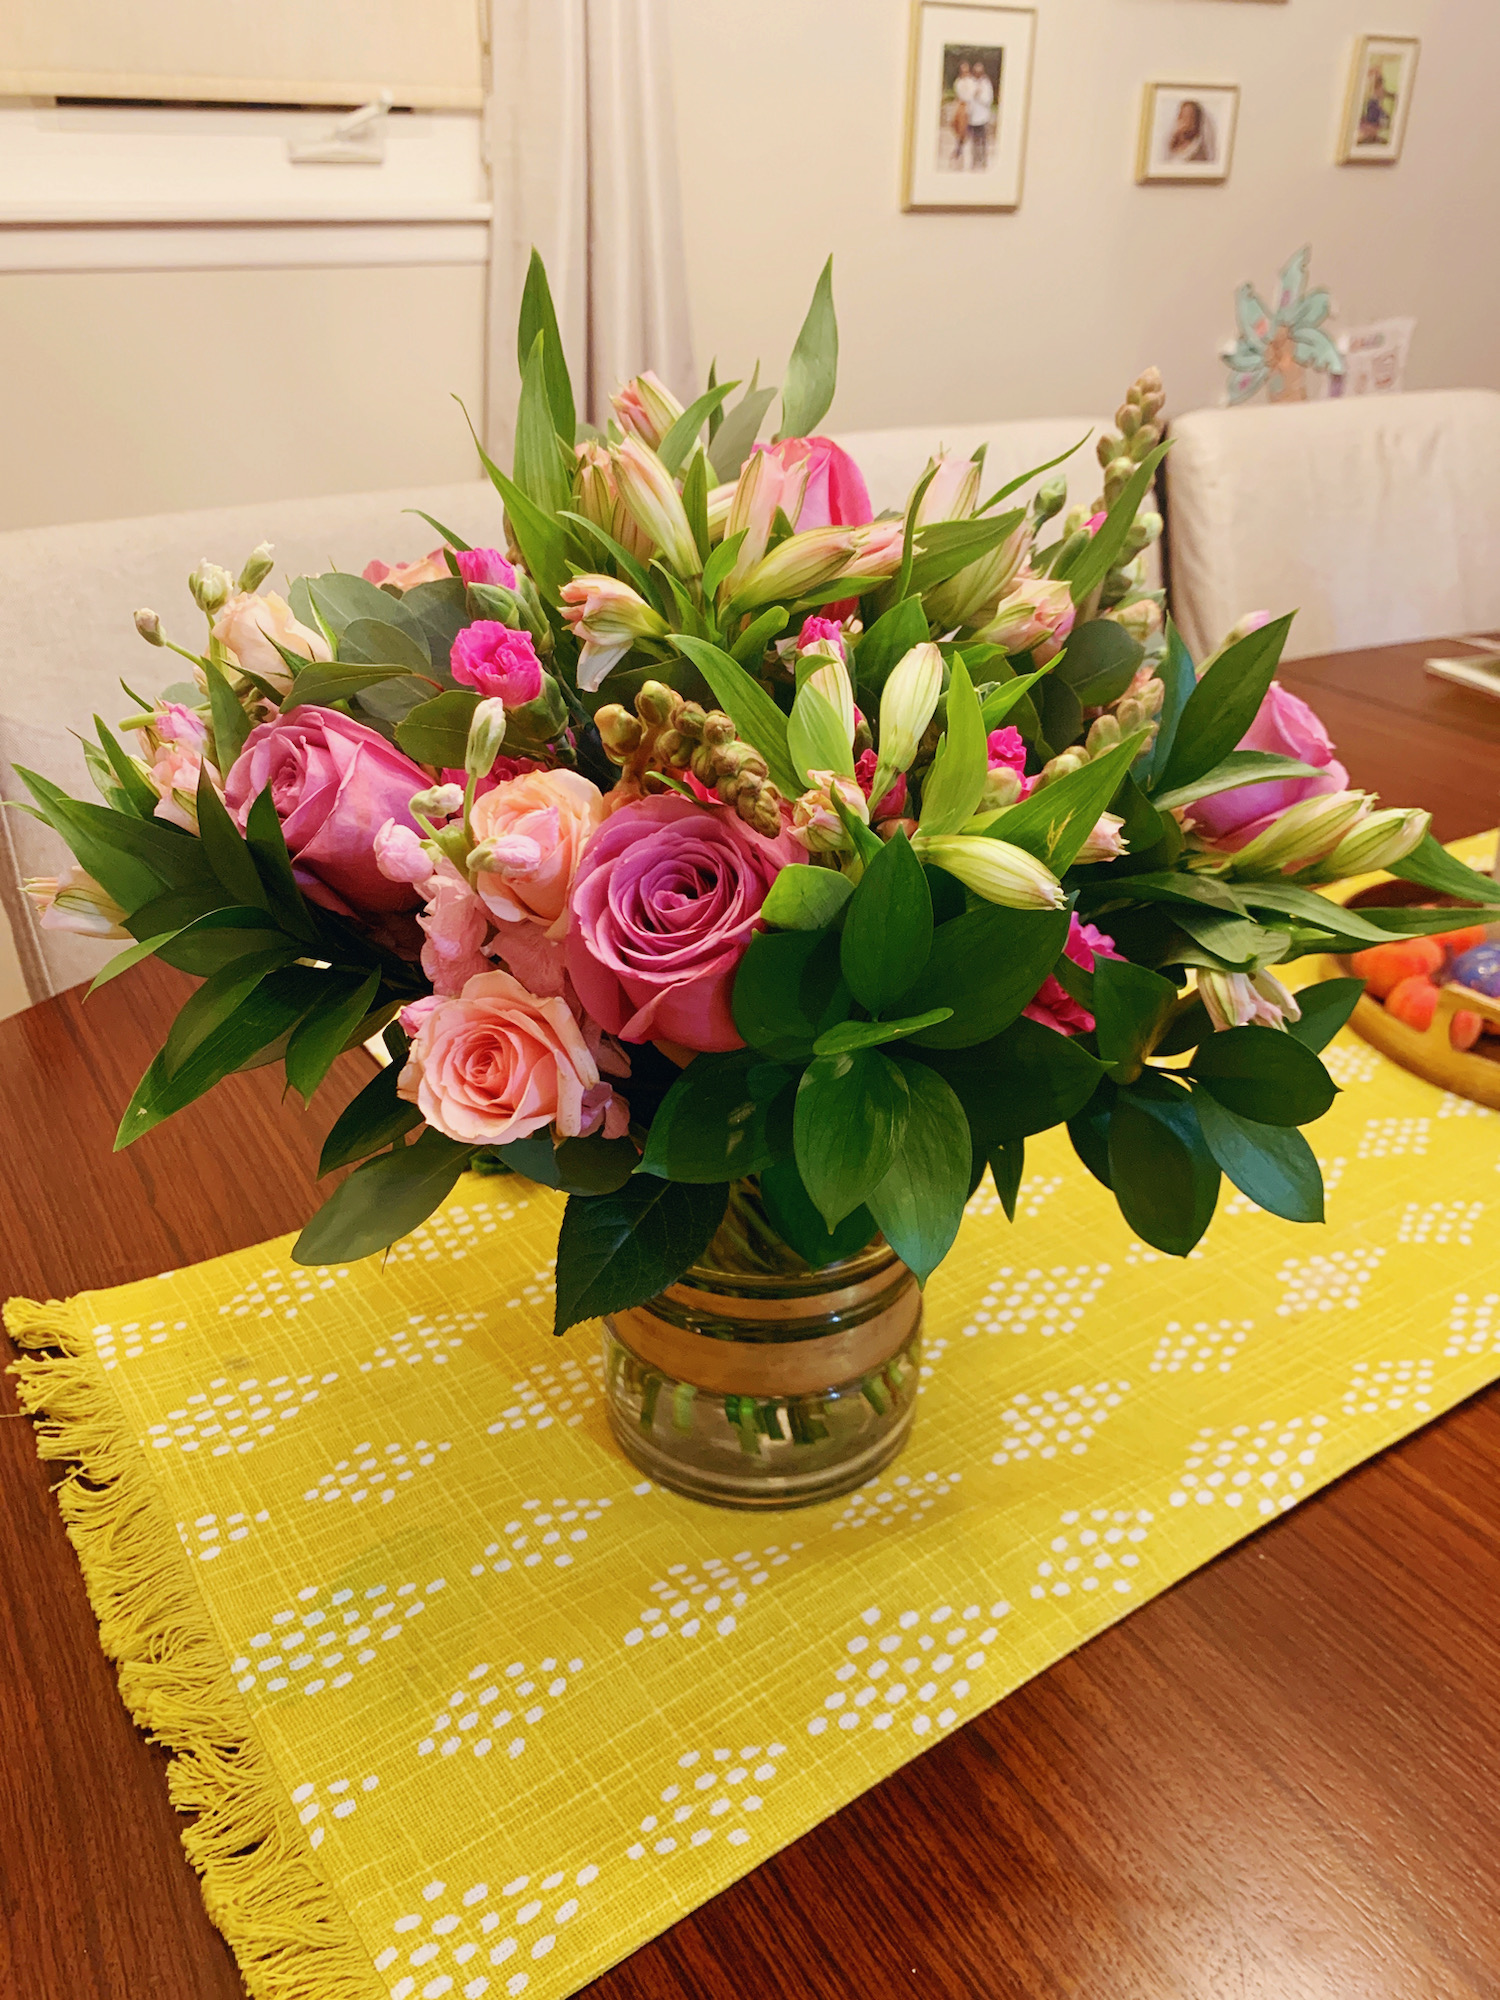 Large bouquet of flowers in different shade of pink inside of a gold vase. Vase on top of a yellow table linen.